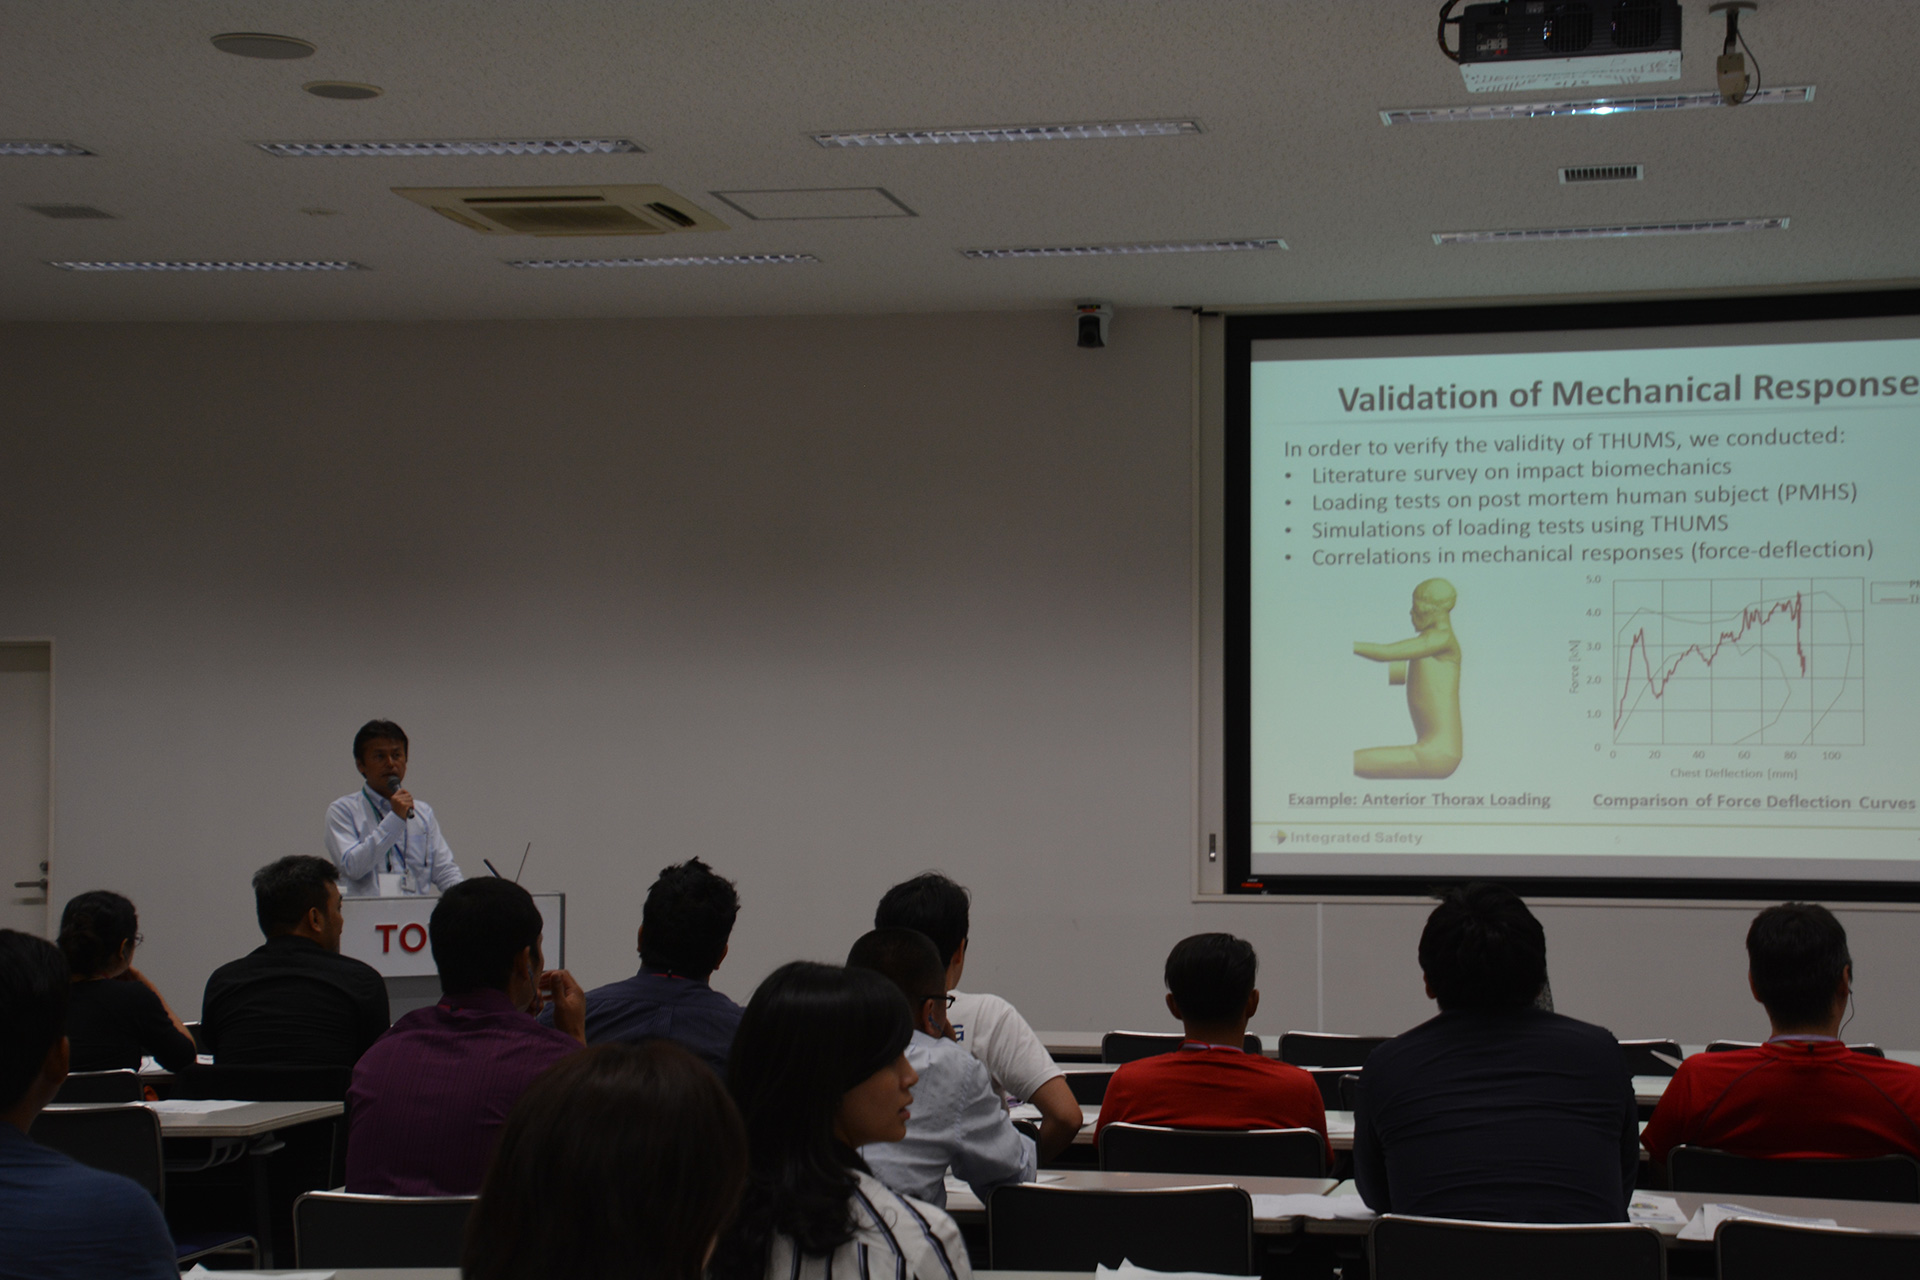 Lecture of Development and Application of Virtual Human Body Model, THUMS by Mr. Kitagawa